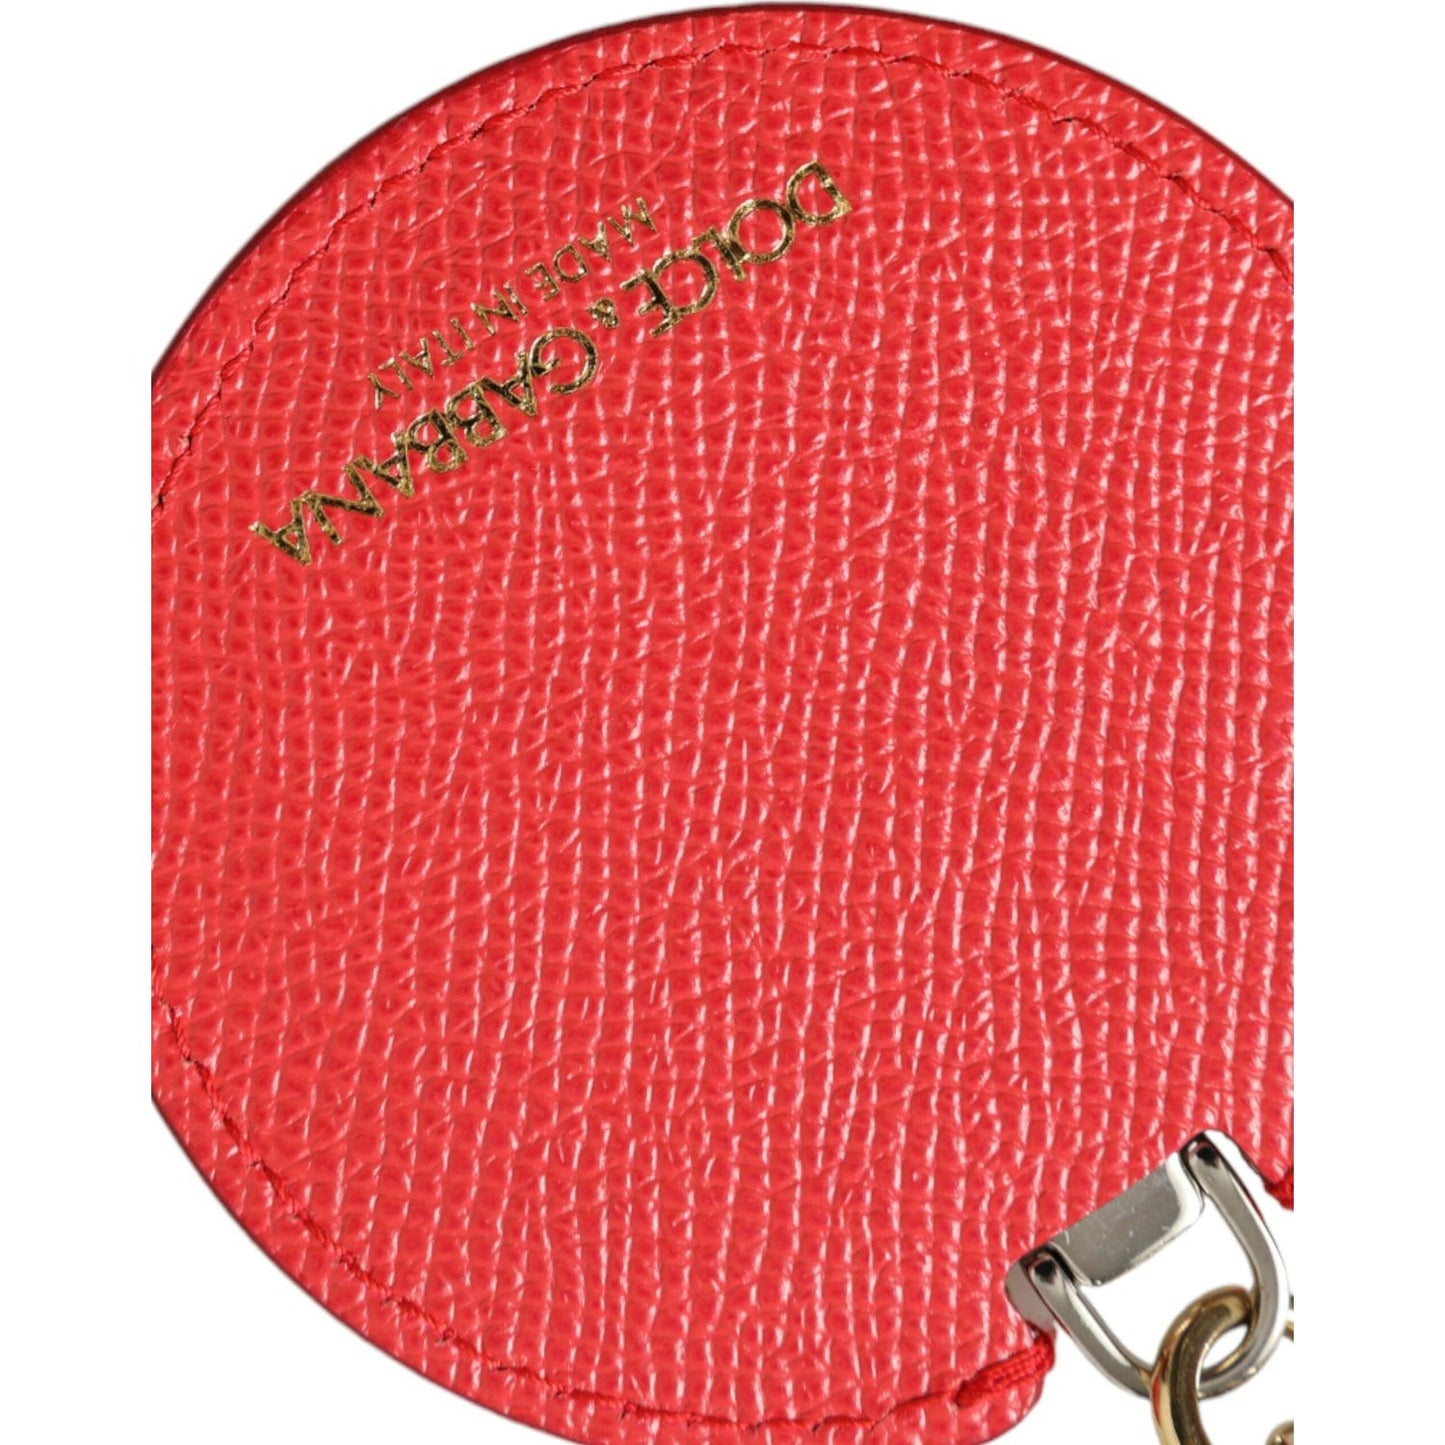 Dolce & Gabbana Elegant Red Leather Keychain with Gold Accents elegant-red-leather-keychain-with-gold-accents